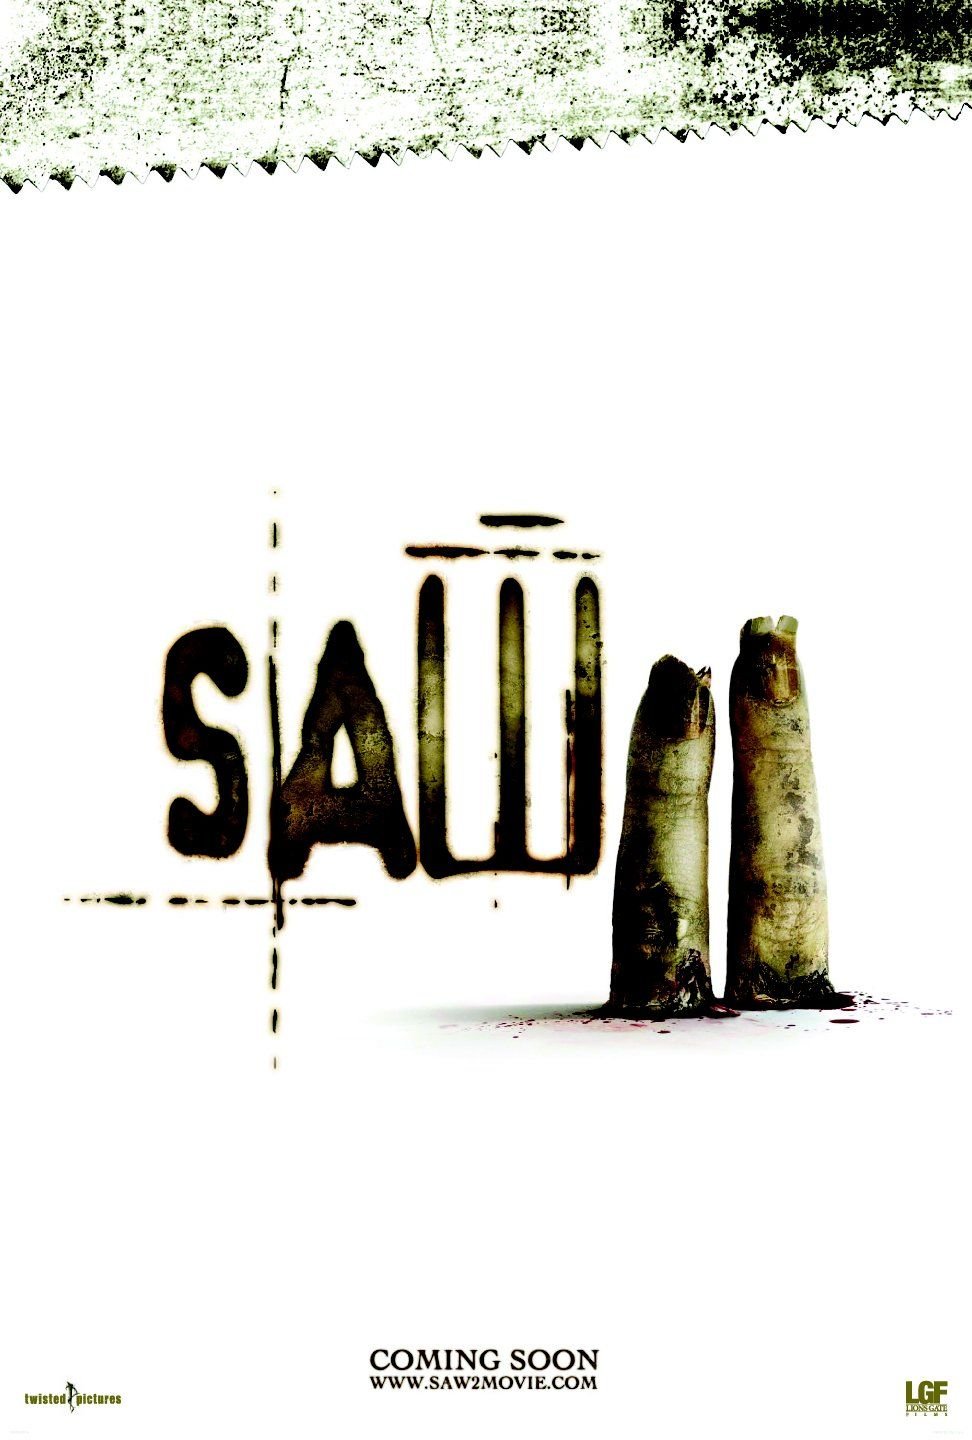 Poster of the movie Saw II